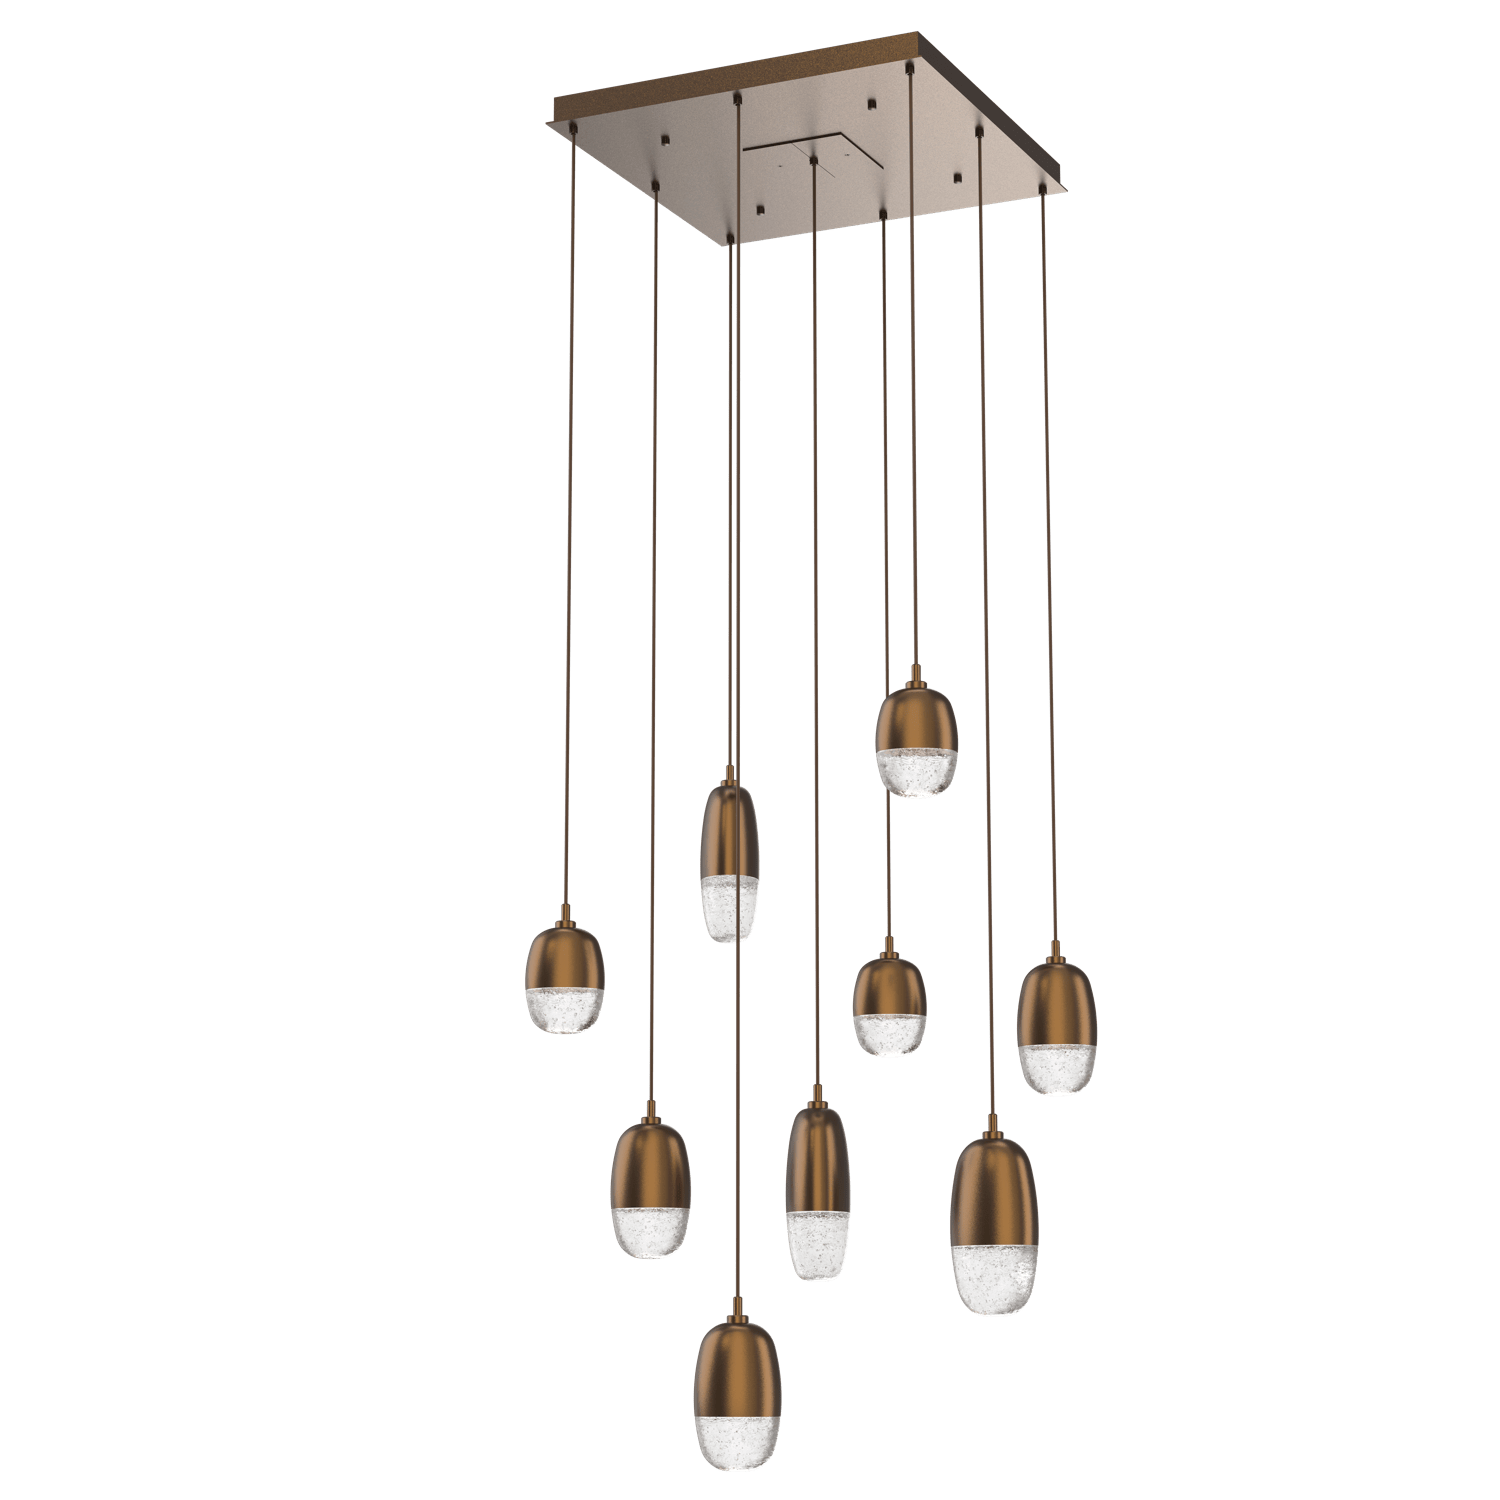 CHB0079-09-FB-Hammerton-Studio-Pebble-9-light-square-pendant-chandelier-with-flat-bronze-finish-and-clear-cast-glass-shades-and-LED-lamping